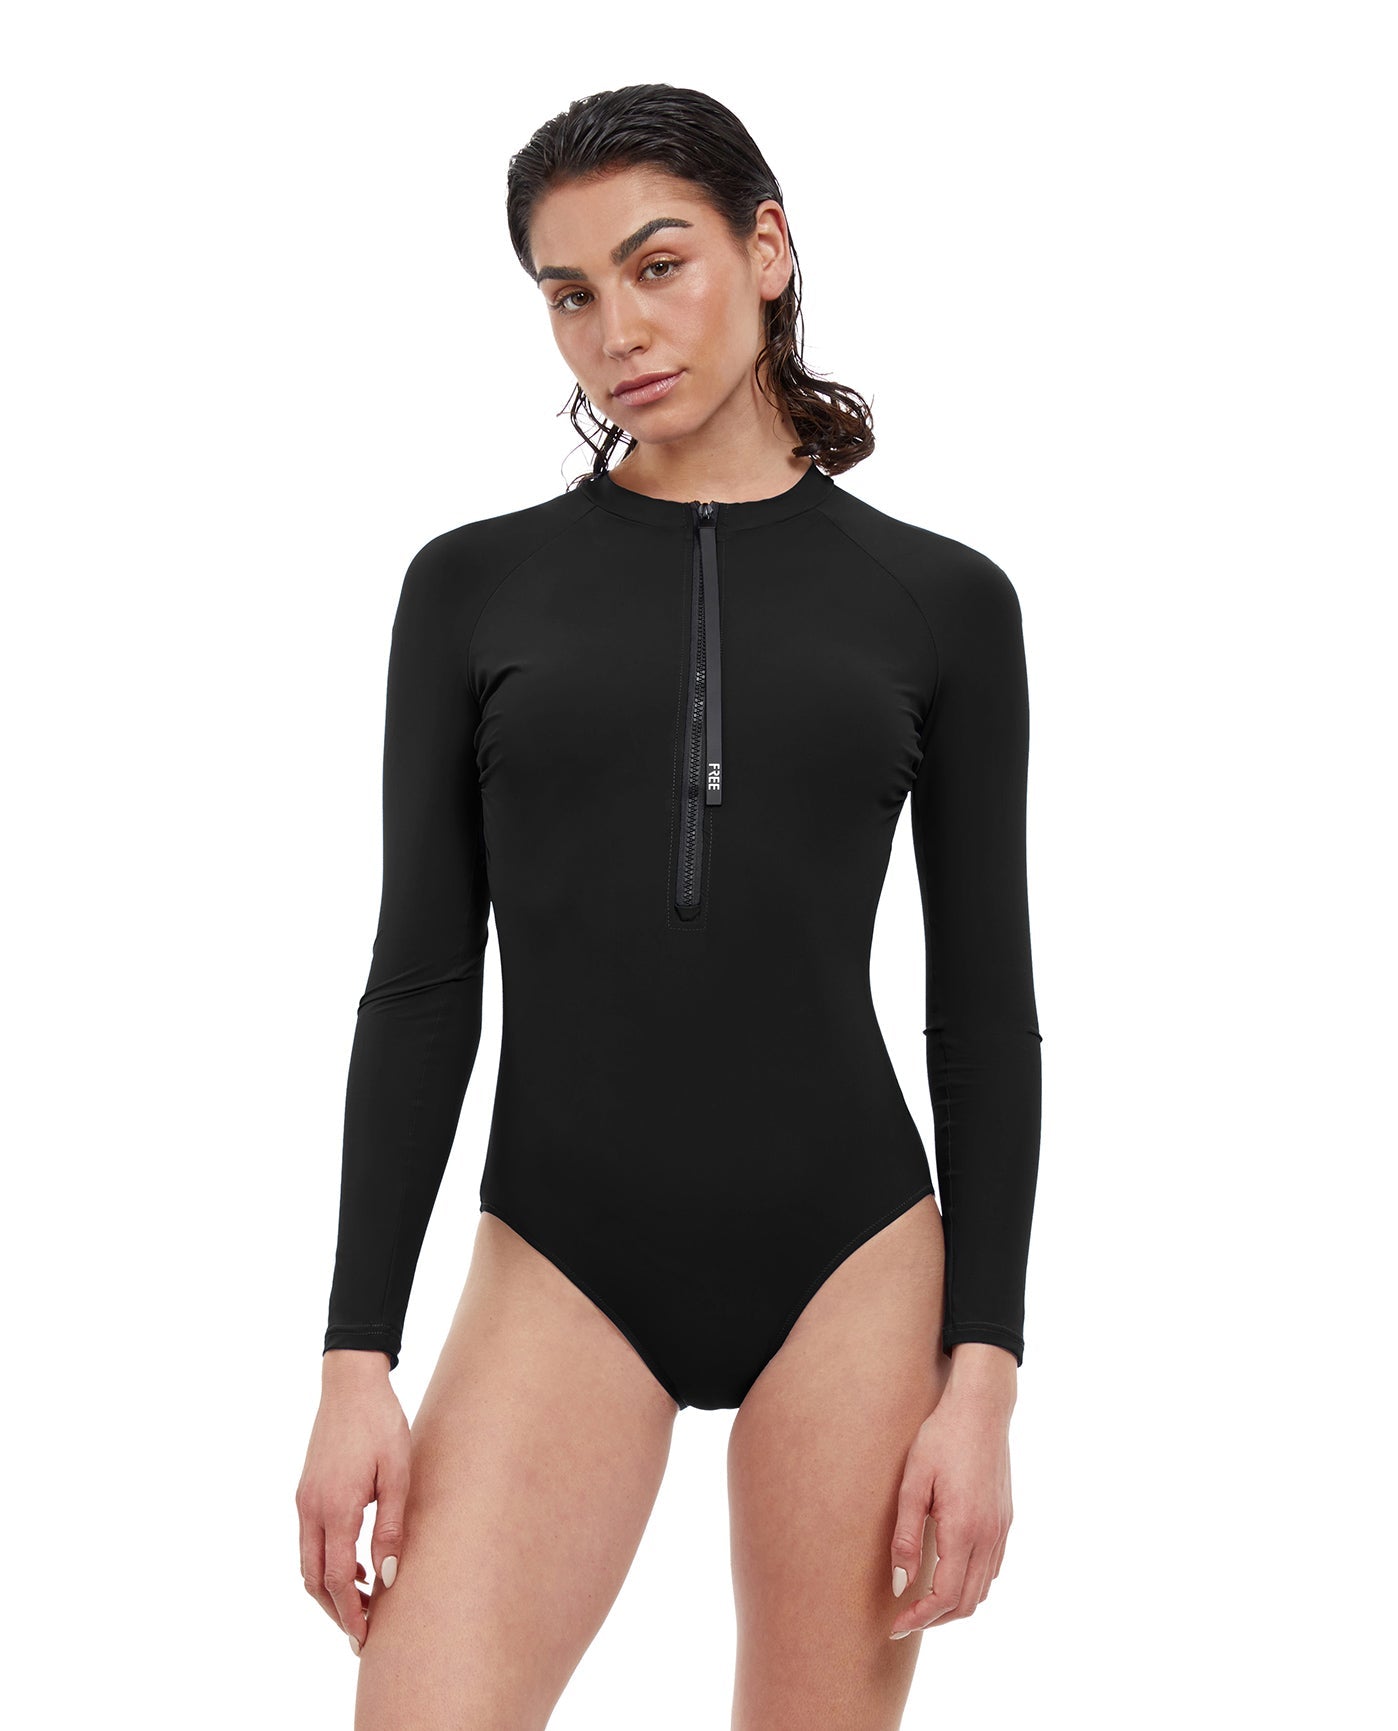 Front View Of Free Sport Ultimate Wave Long Sleeve High Neck Rash Guard One Piece Swimsuit | FREE SPORT ULTIMATE WAVE BLACK